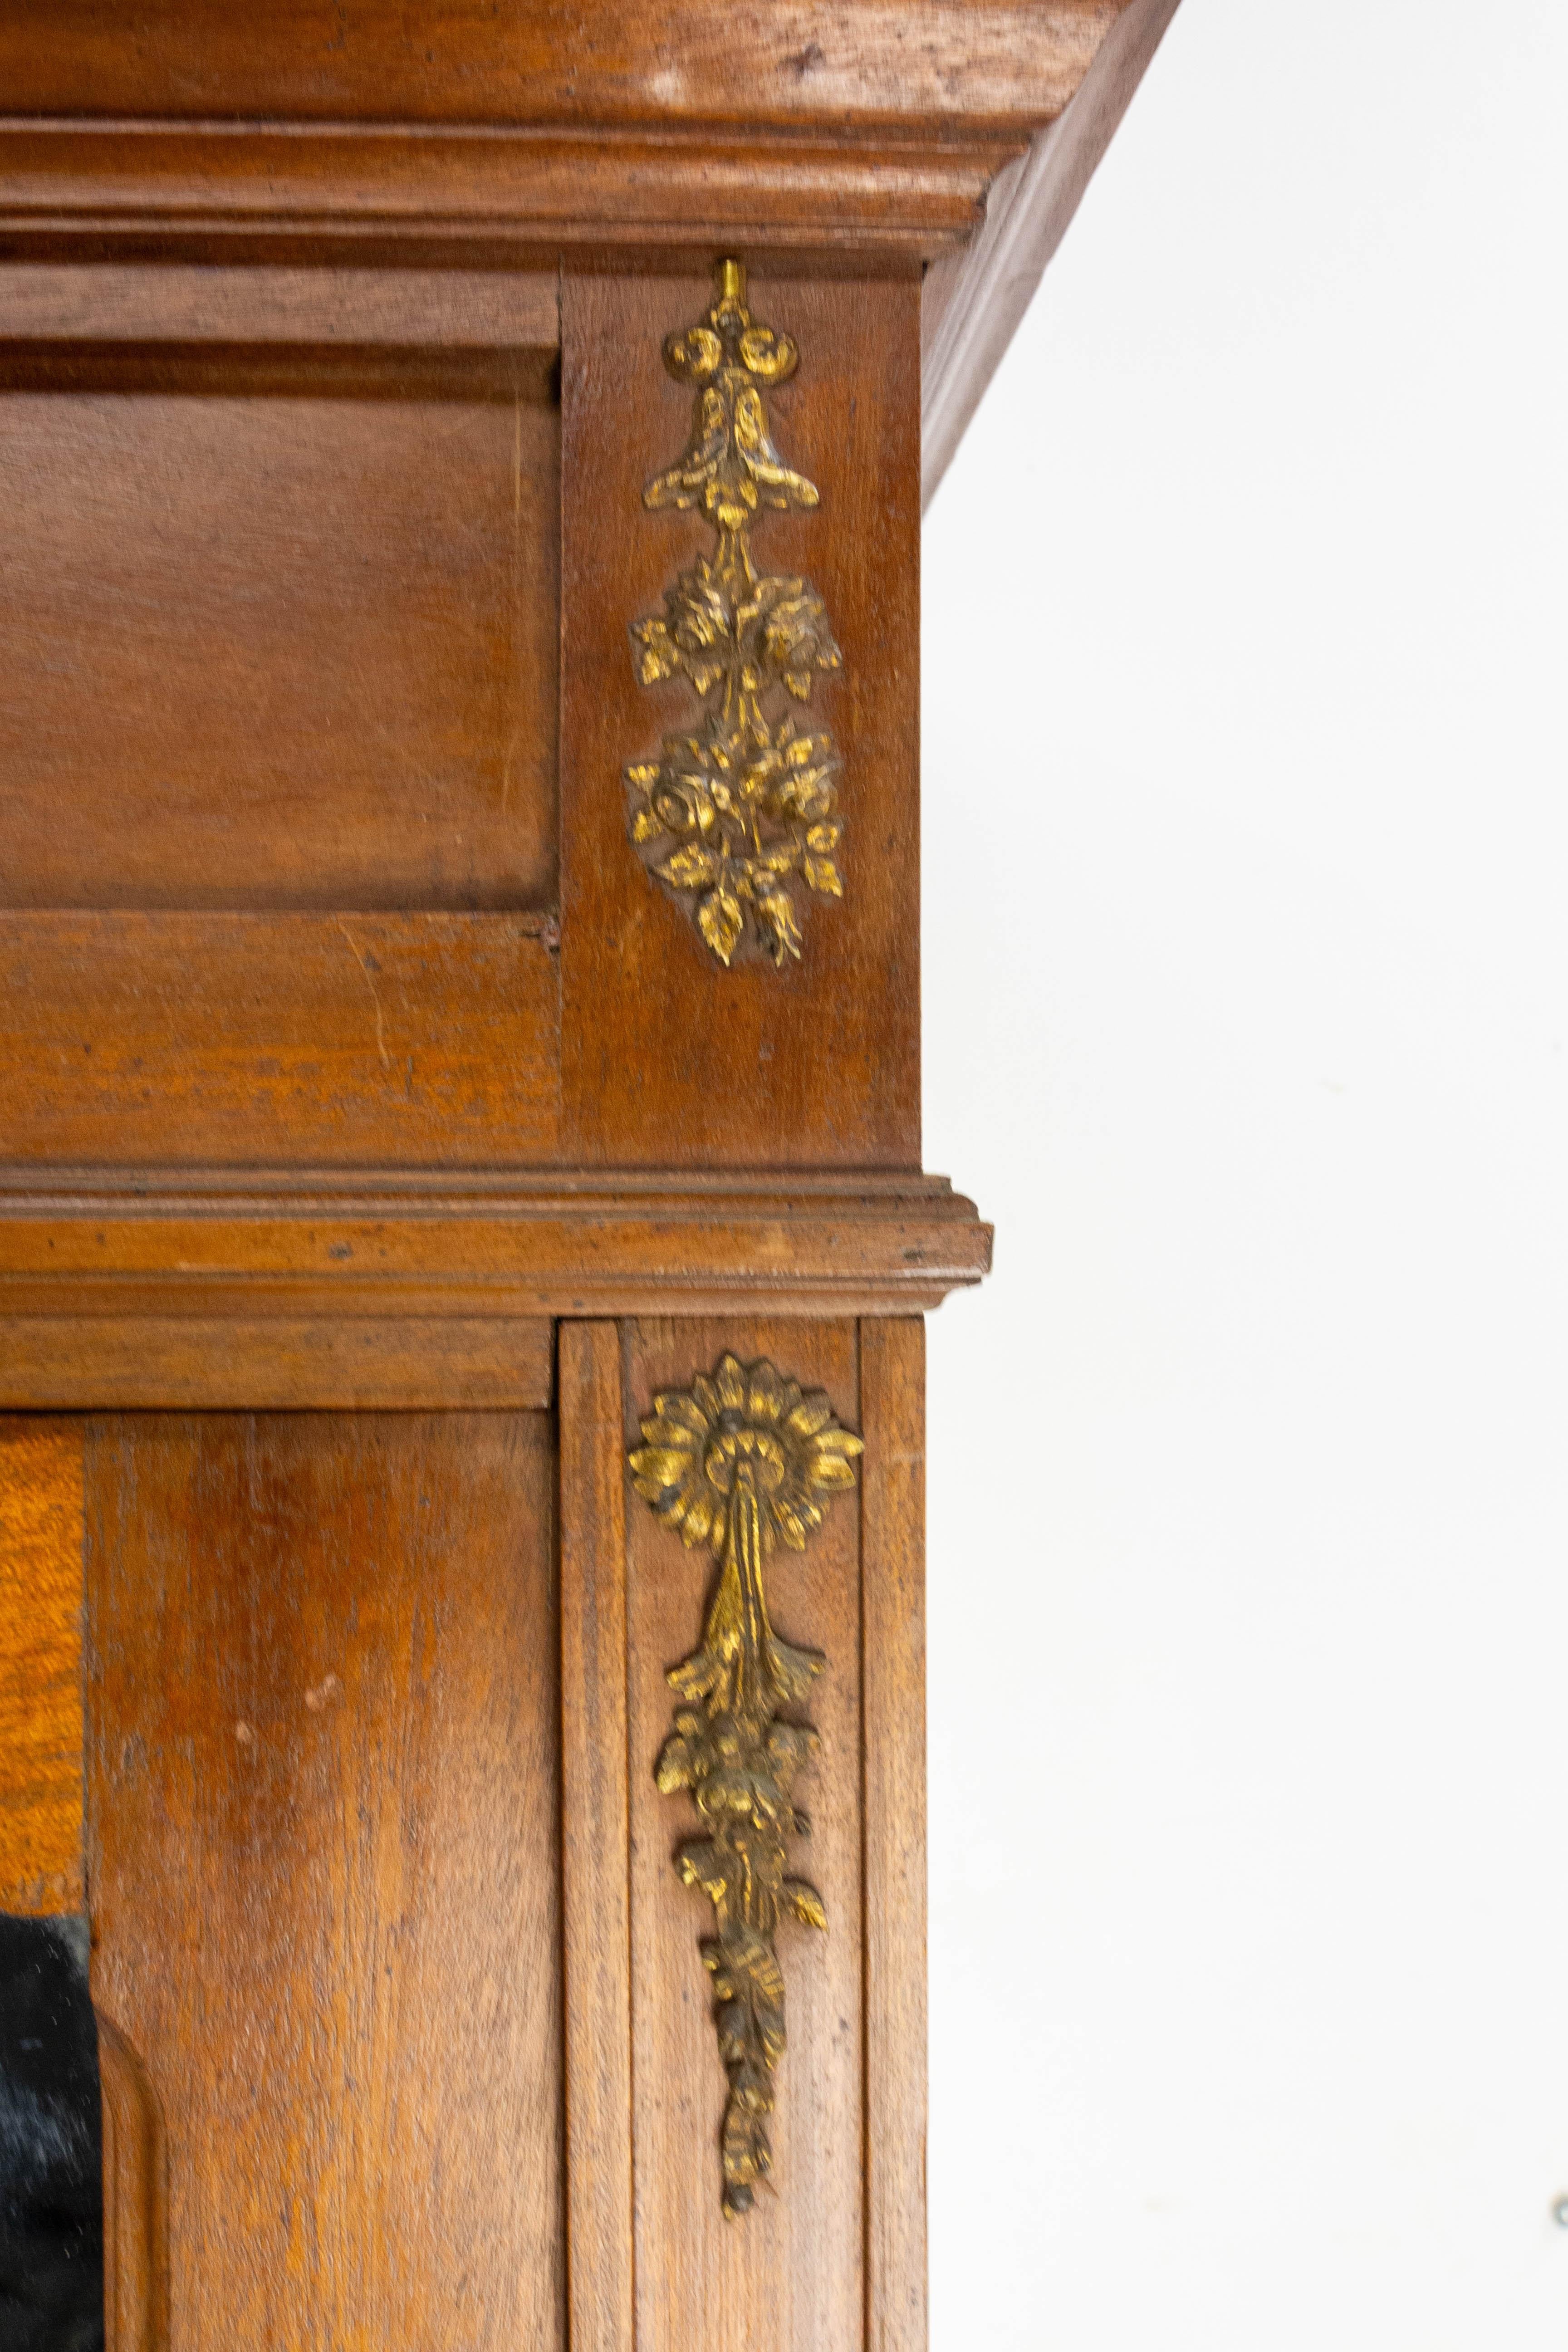 French Iroko Armoire with Beveled Mirrors in the Louis 16 Revival Style, 1900 For Sale 4